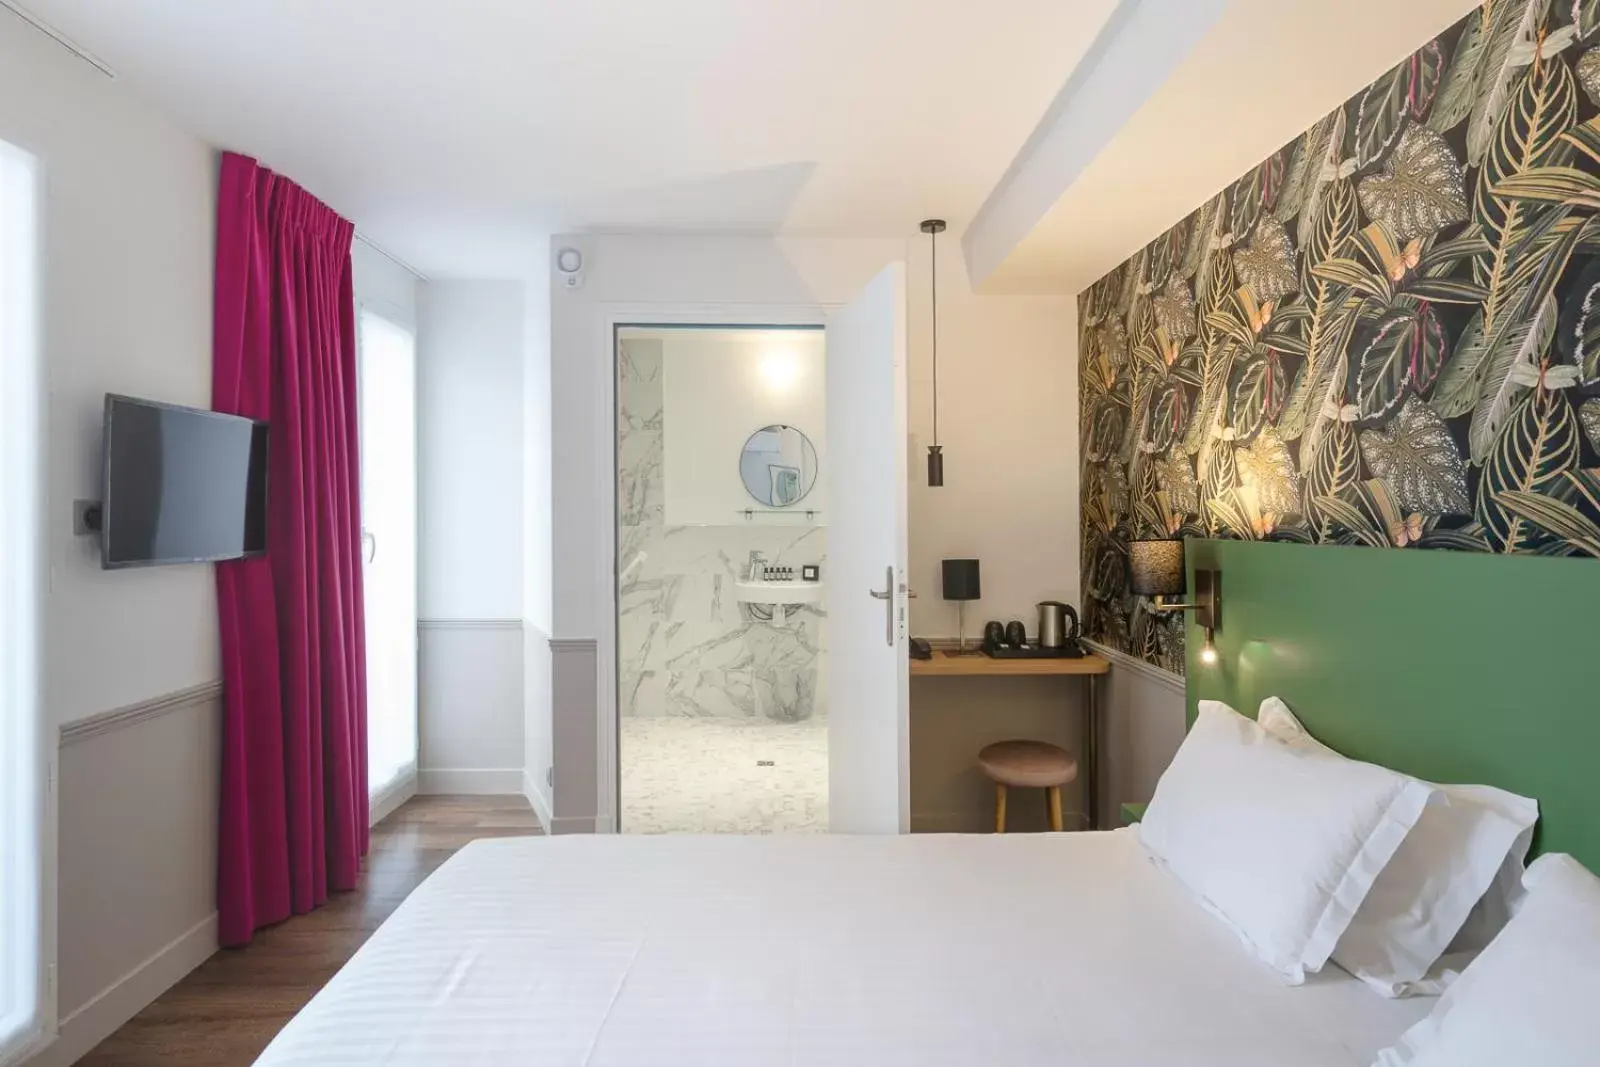 Deluxe Double or Twin Room with Balcony disability access in Hôtel 31 - Paris Tour Eiffel